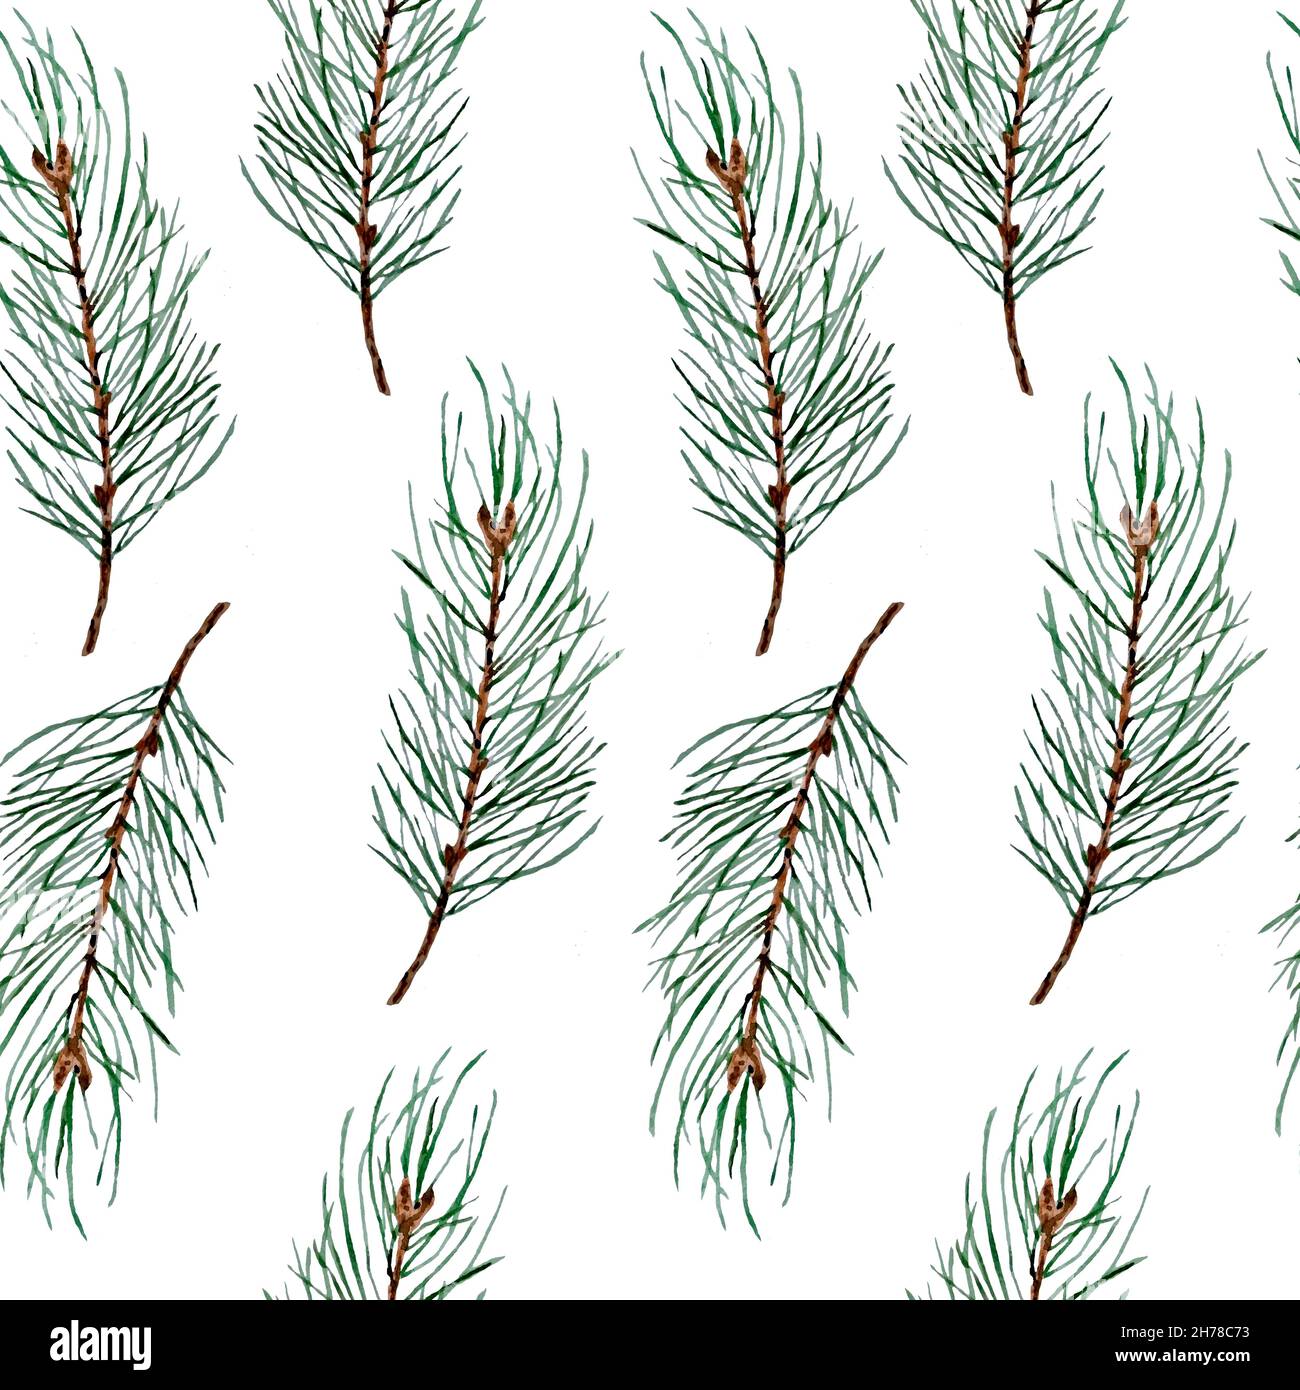 Watercolor hand drawn seamless pattern with pine conifer spruce branches twigs and cones on white background, Christmas winter new year print for textile wrapping paper, natural orhnic colors green evergreen brown fabric Stock Photo